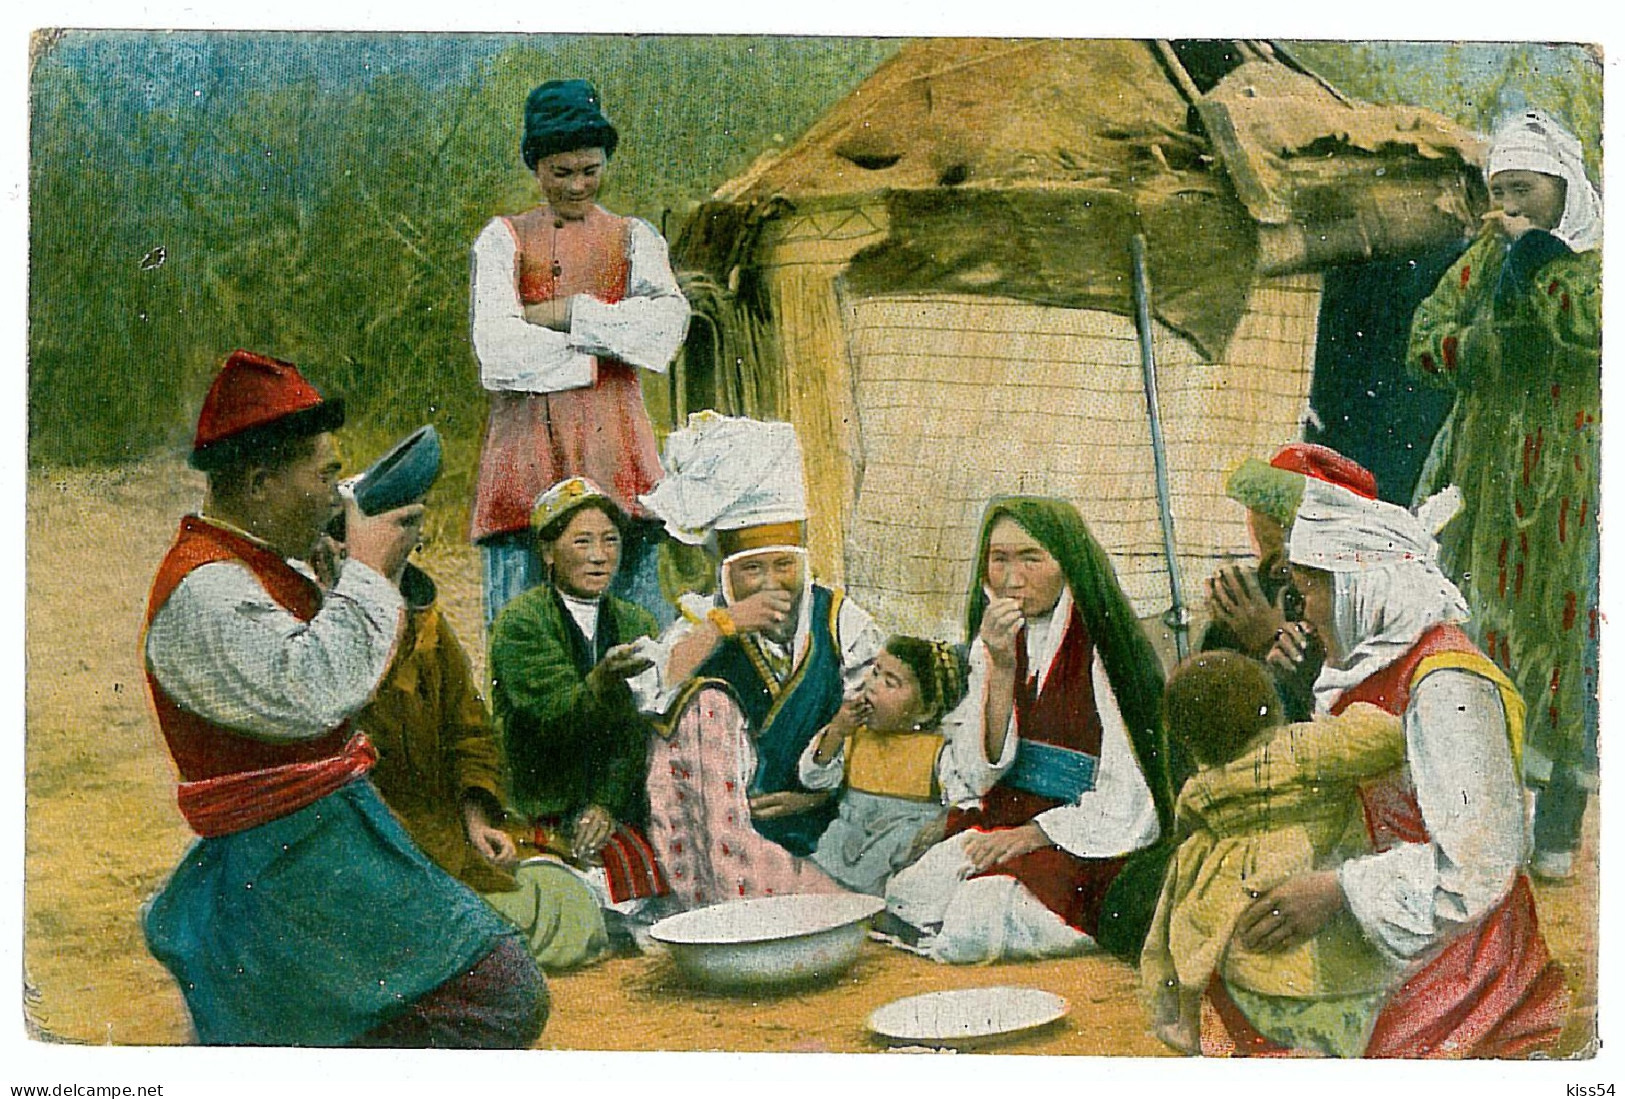 KYR 4 - 7846 ETHNICS, From Central Asian, Kyrgyzstan - Old Postcard - Used - 1917 - Kirgizië